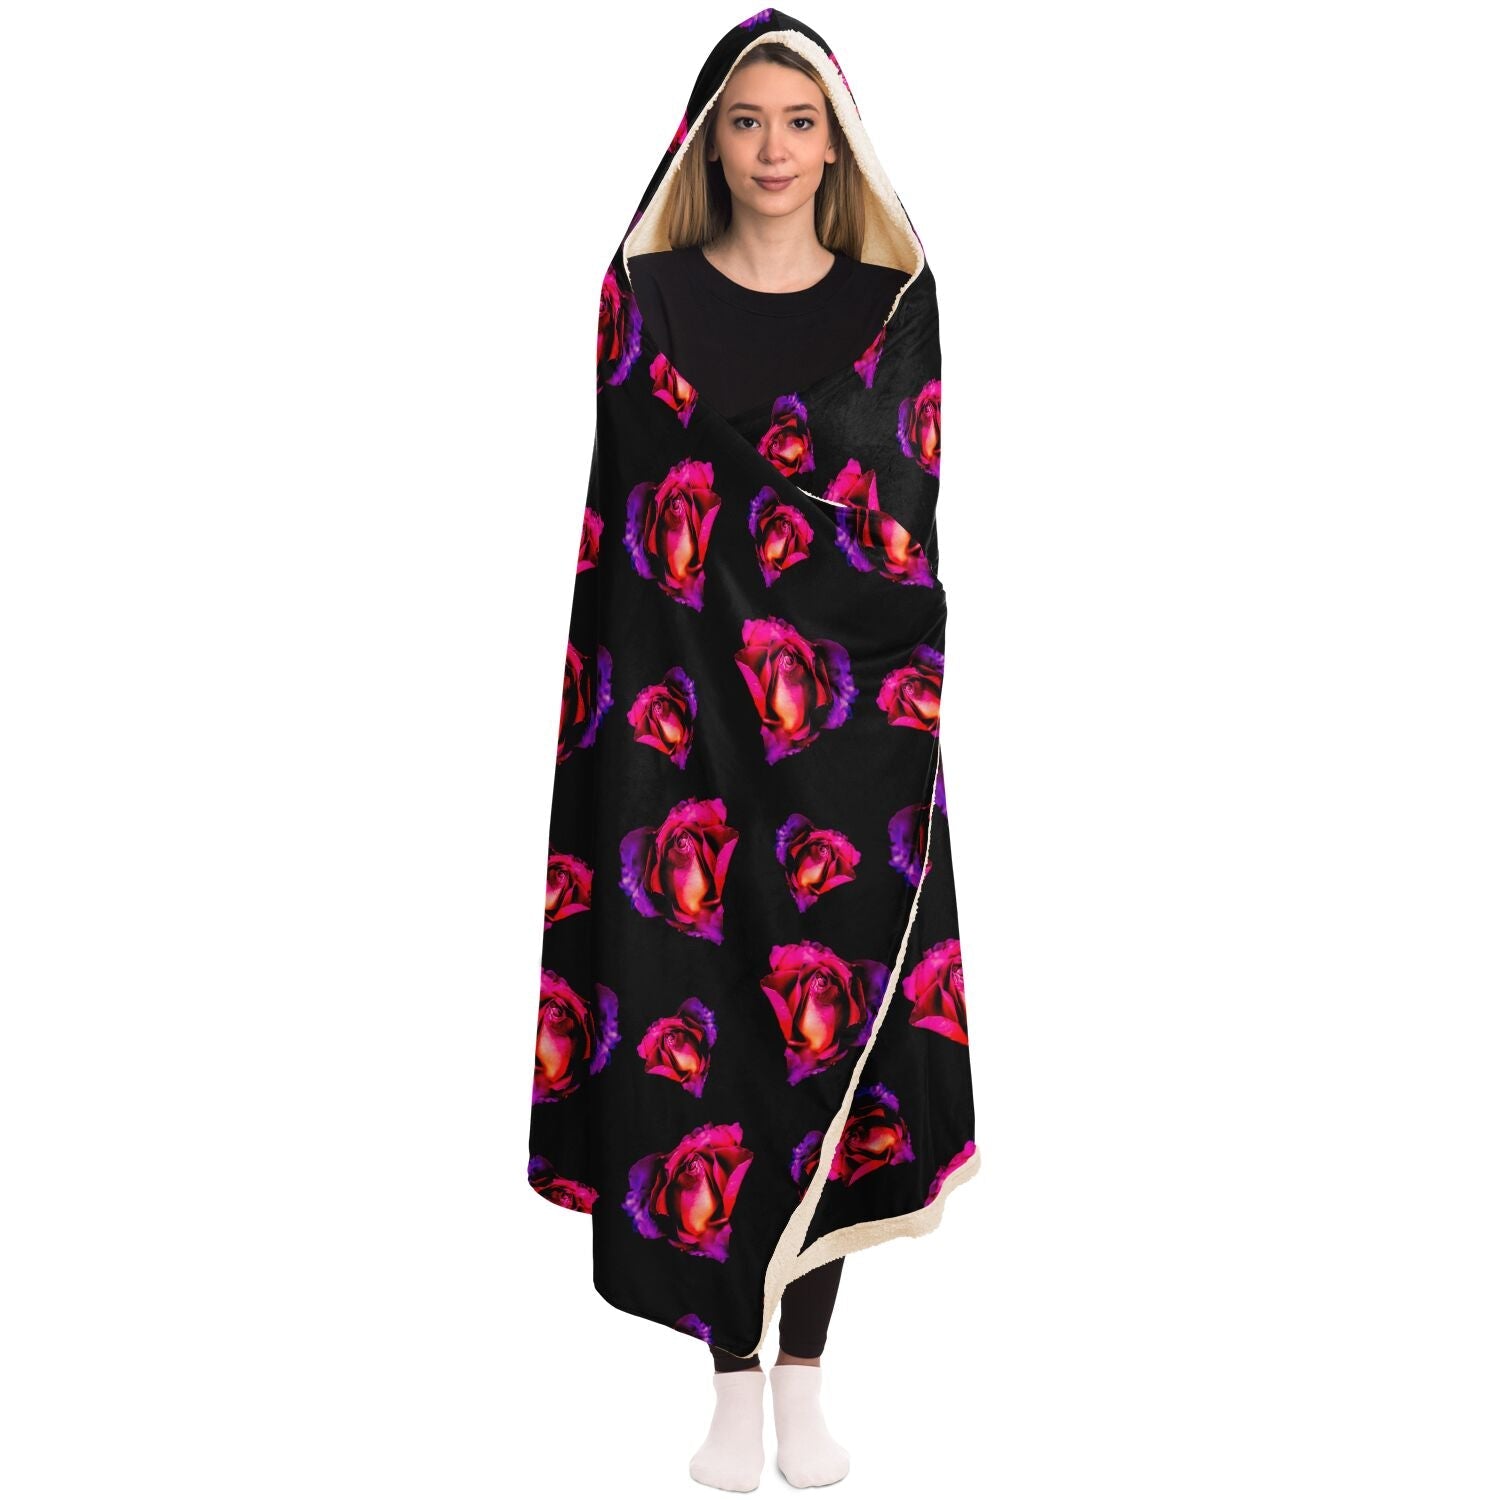 Kiss From A Rose Hooded Blanket (Available in Premium Sherpa & Micro Fleece) - The Grateful Hearts